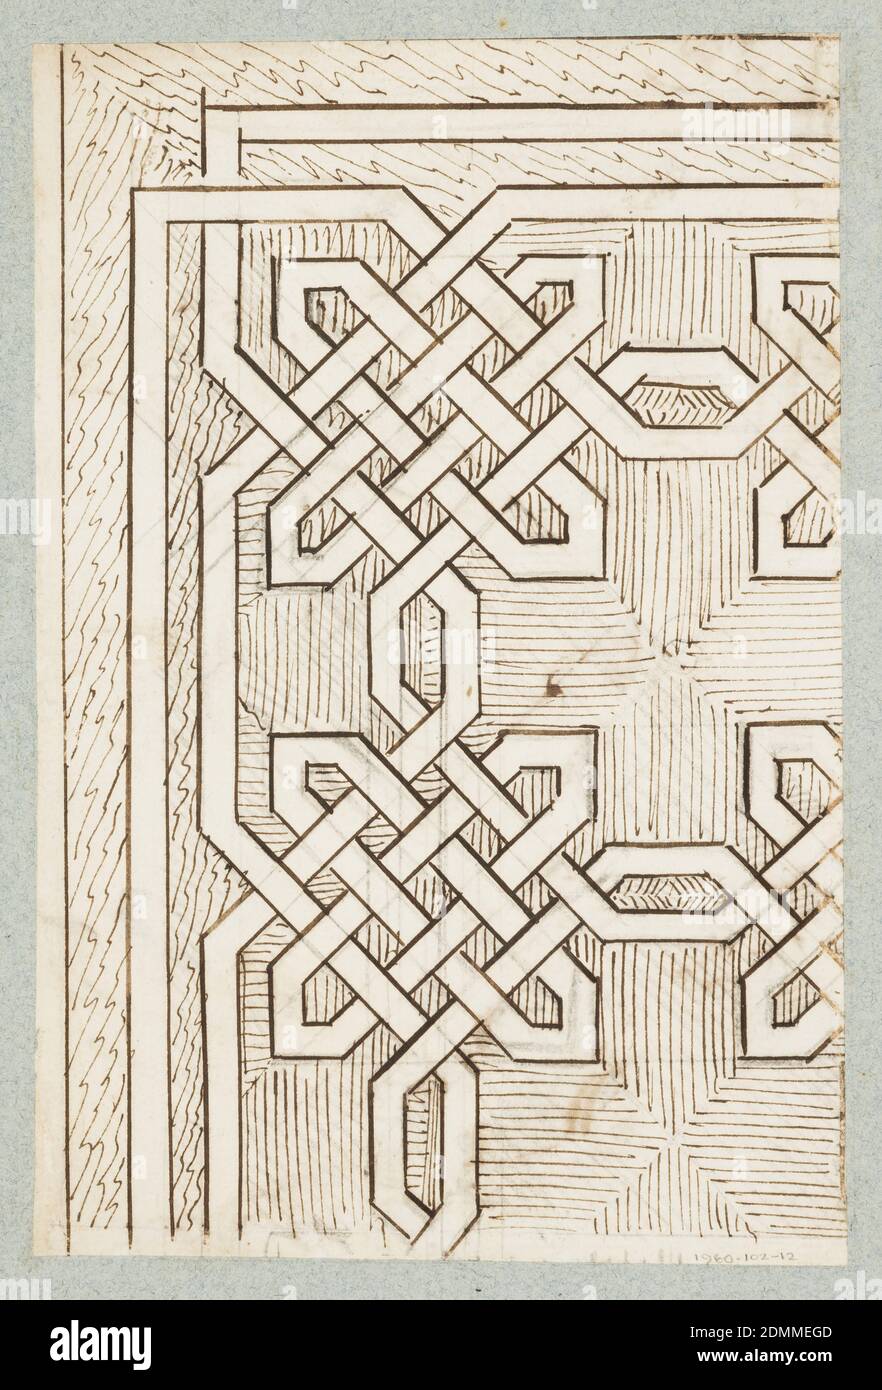 Four Left Halves of Escutcheons, Gilles-Marie Oppenord, French, 1672–1742, Pencil, pen and brown ink with grey wash, partial framing line in red chalk, Horizontal rectangle., Recto: Four left halves of escutcheons decorated with scrolls, leaves and surmounted by crowns. One shows a half-female-half-lion, another a head over a crescent and spear-head., Verso: Interlacing pattern of band-work, probably intended to be carried out in marble or wood flooring. The ground is indicated in shading, perhaps a suggestion for Suite XIV, plate 1., One sheet of paper drawn on recto and verso Stock Photo